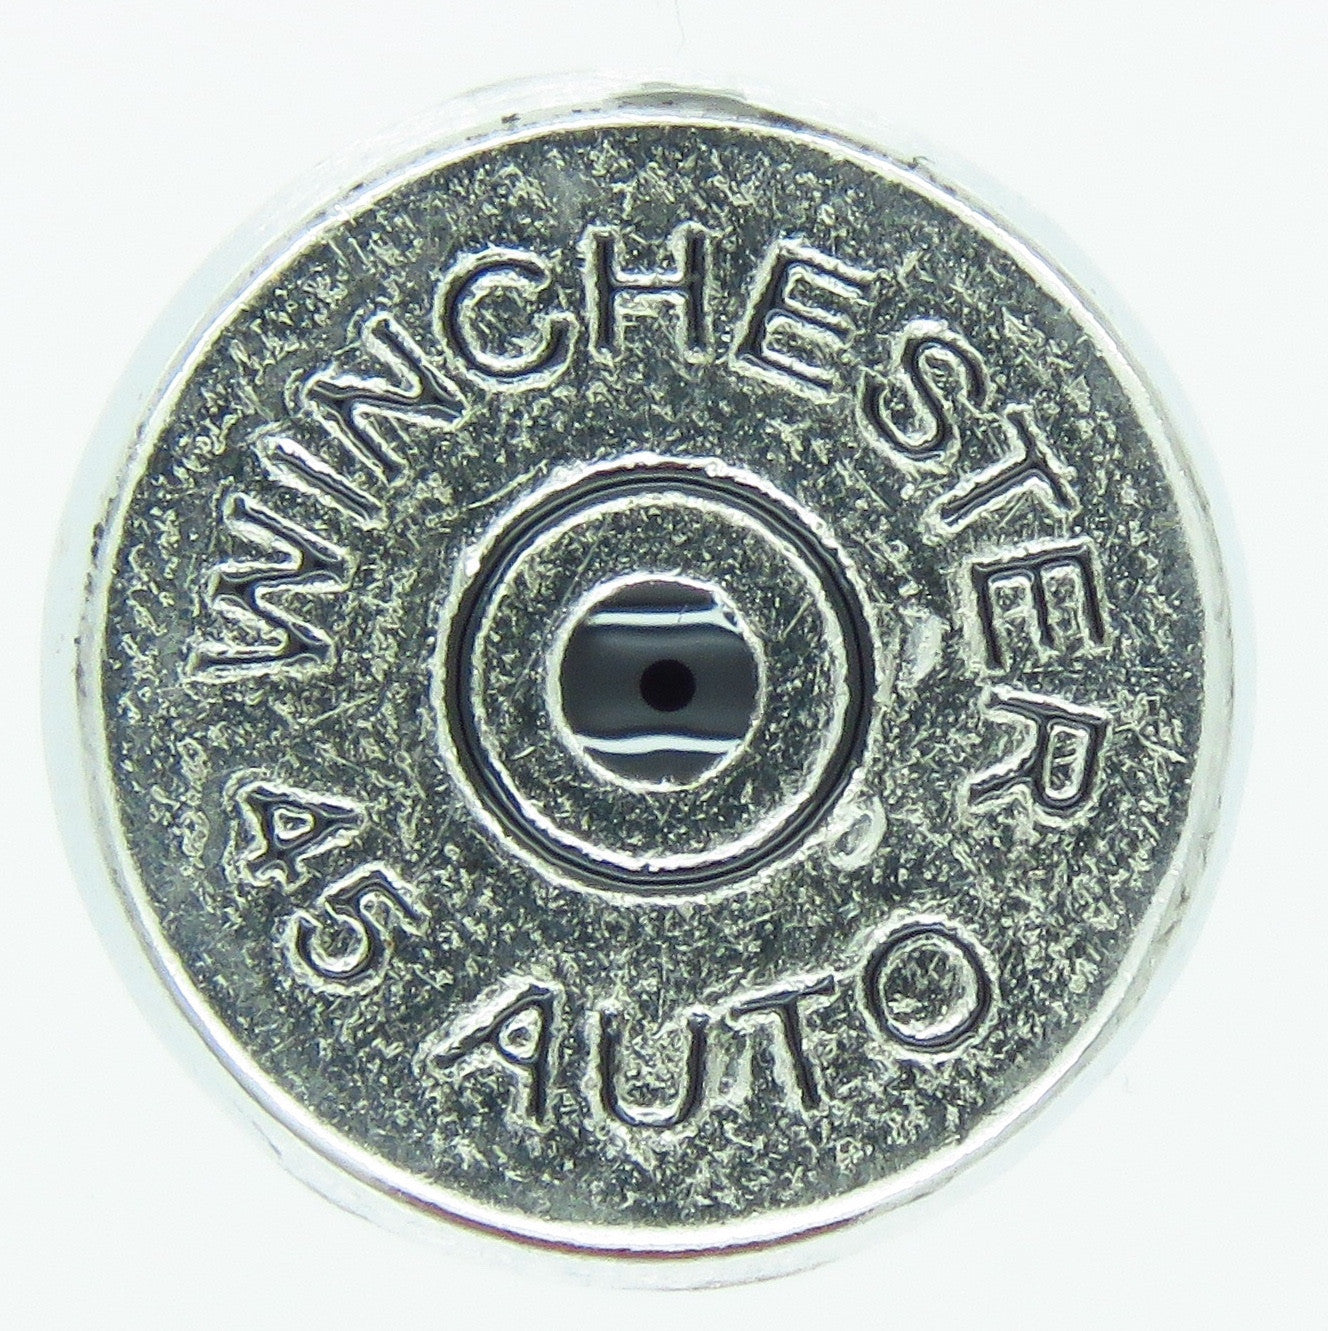 Replica Winchester 45 Bullet Charm - Stoney Creek Charms